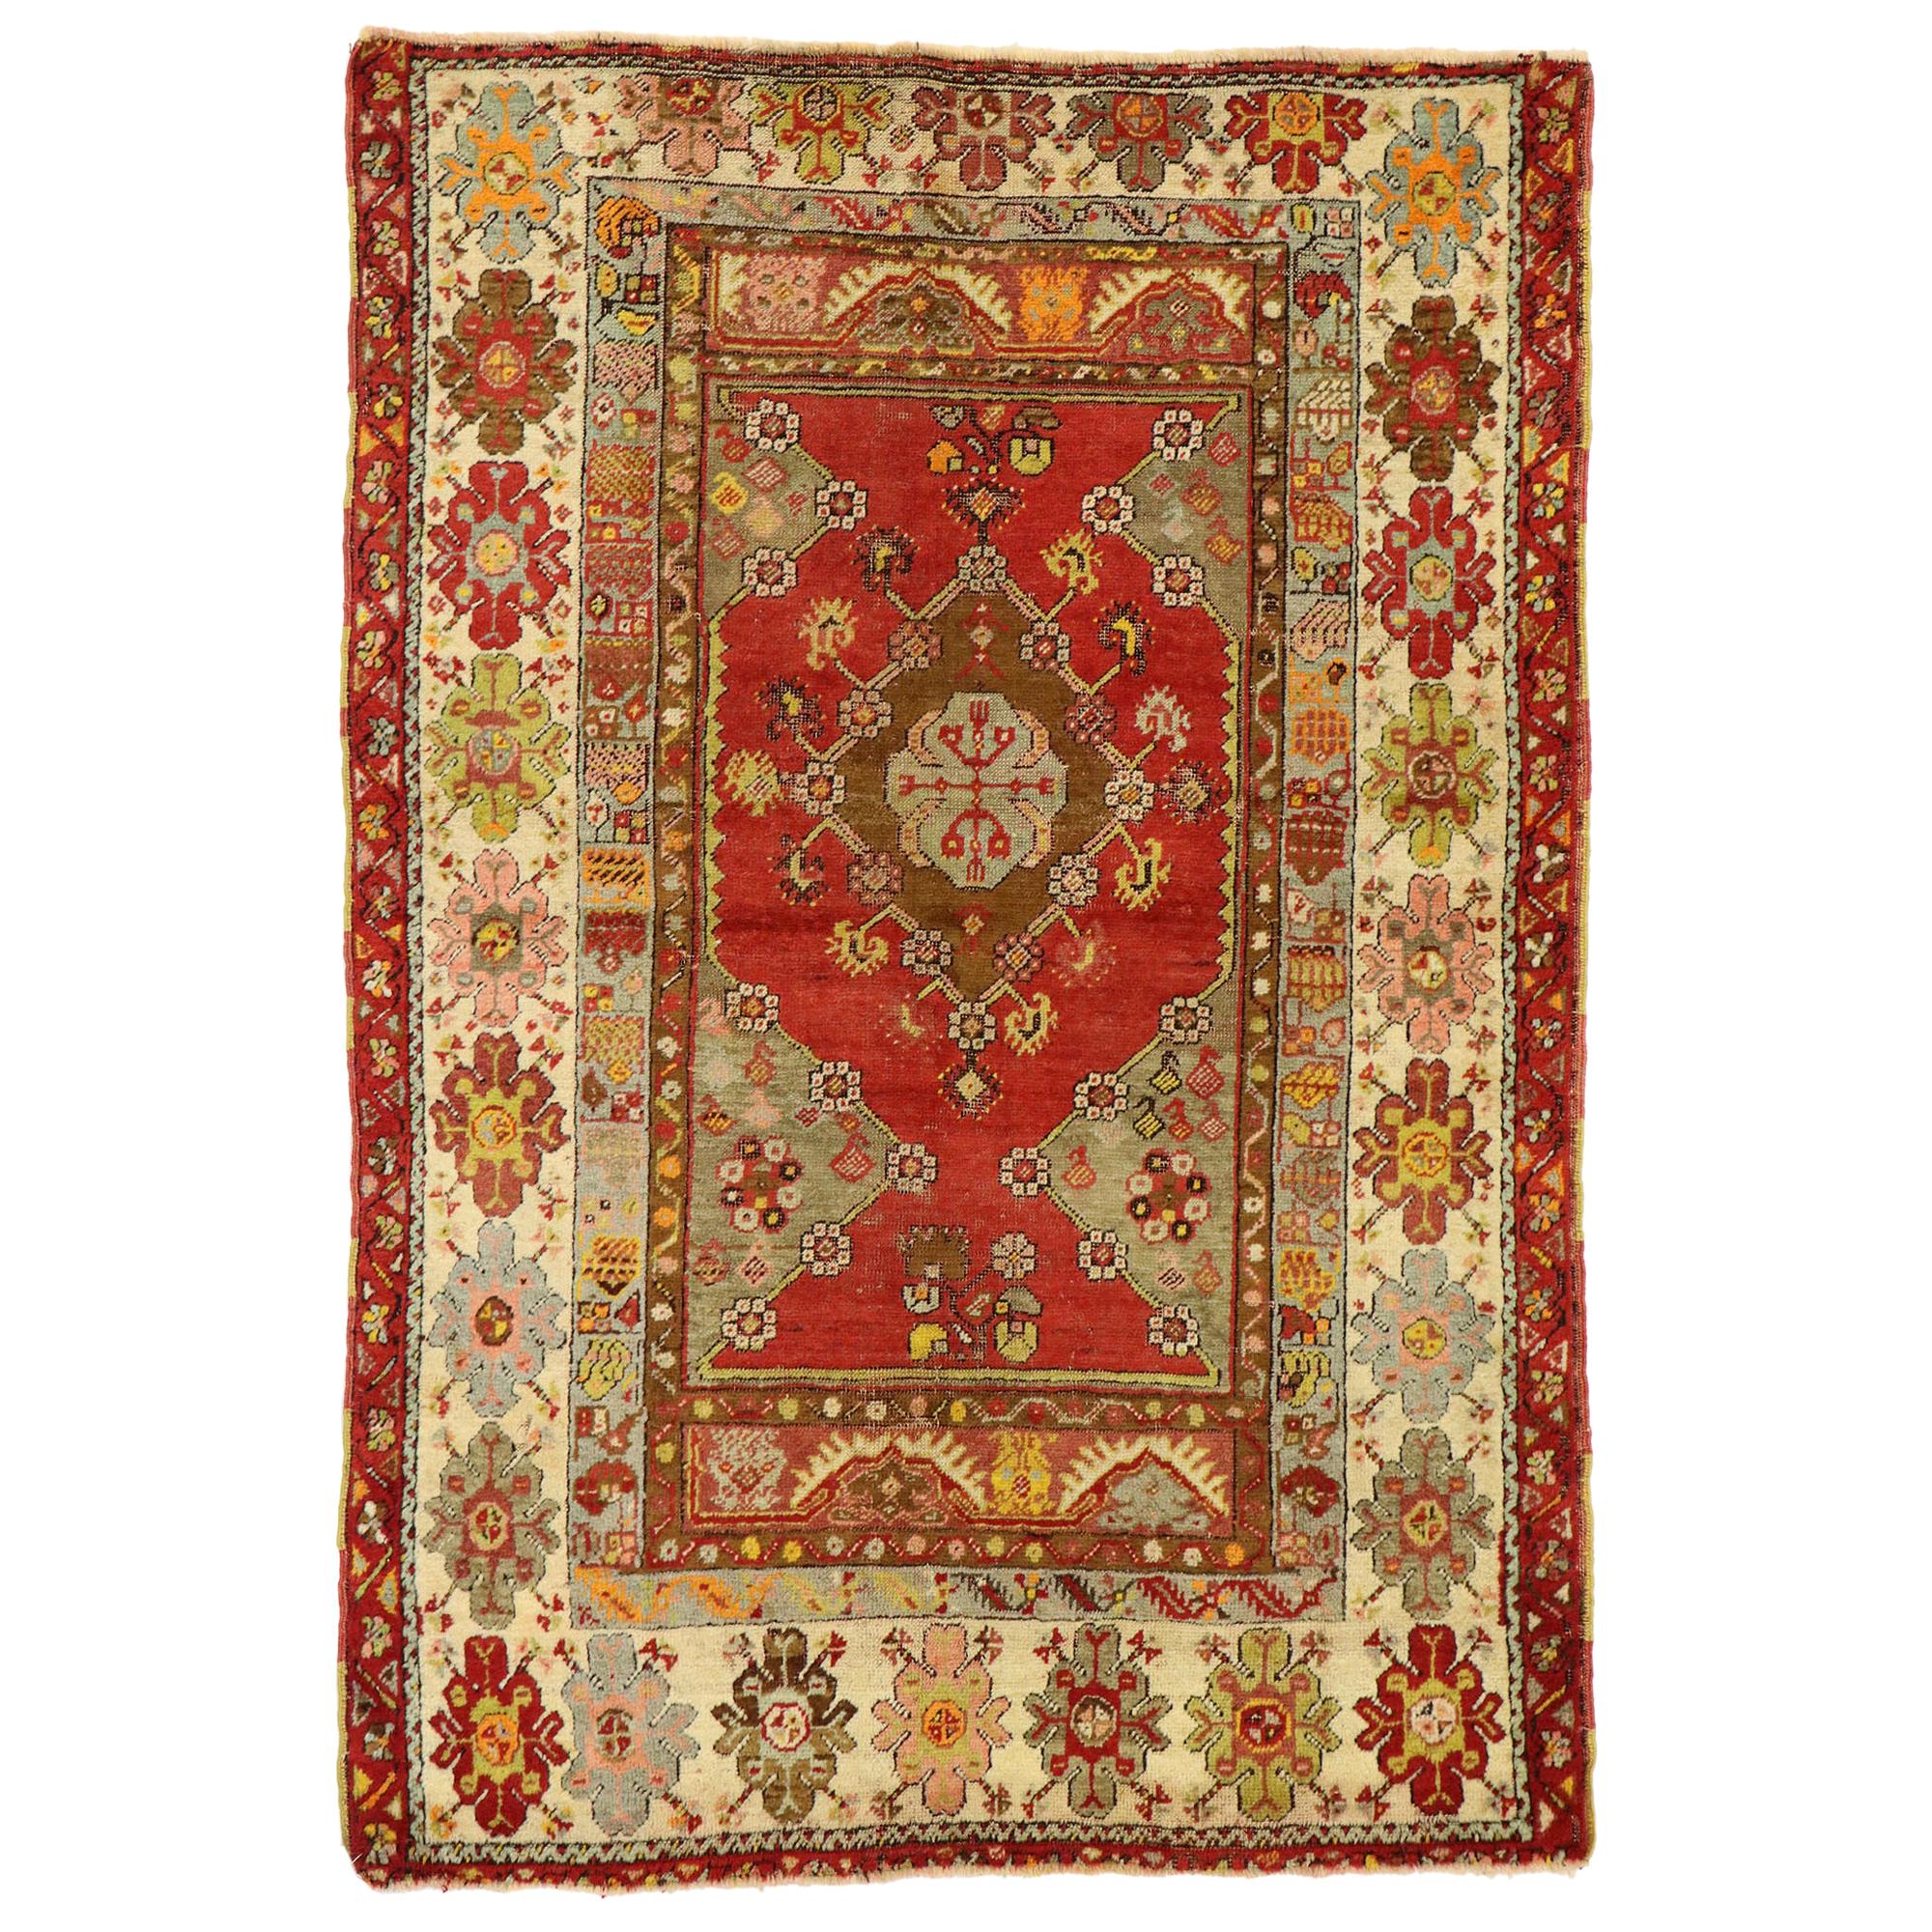 Vintage Turkish Oushak Rug with Modern Rustic Tribal Style